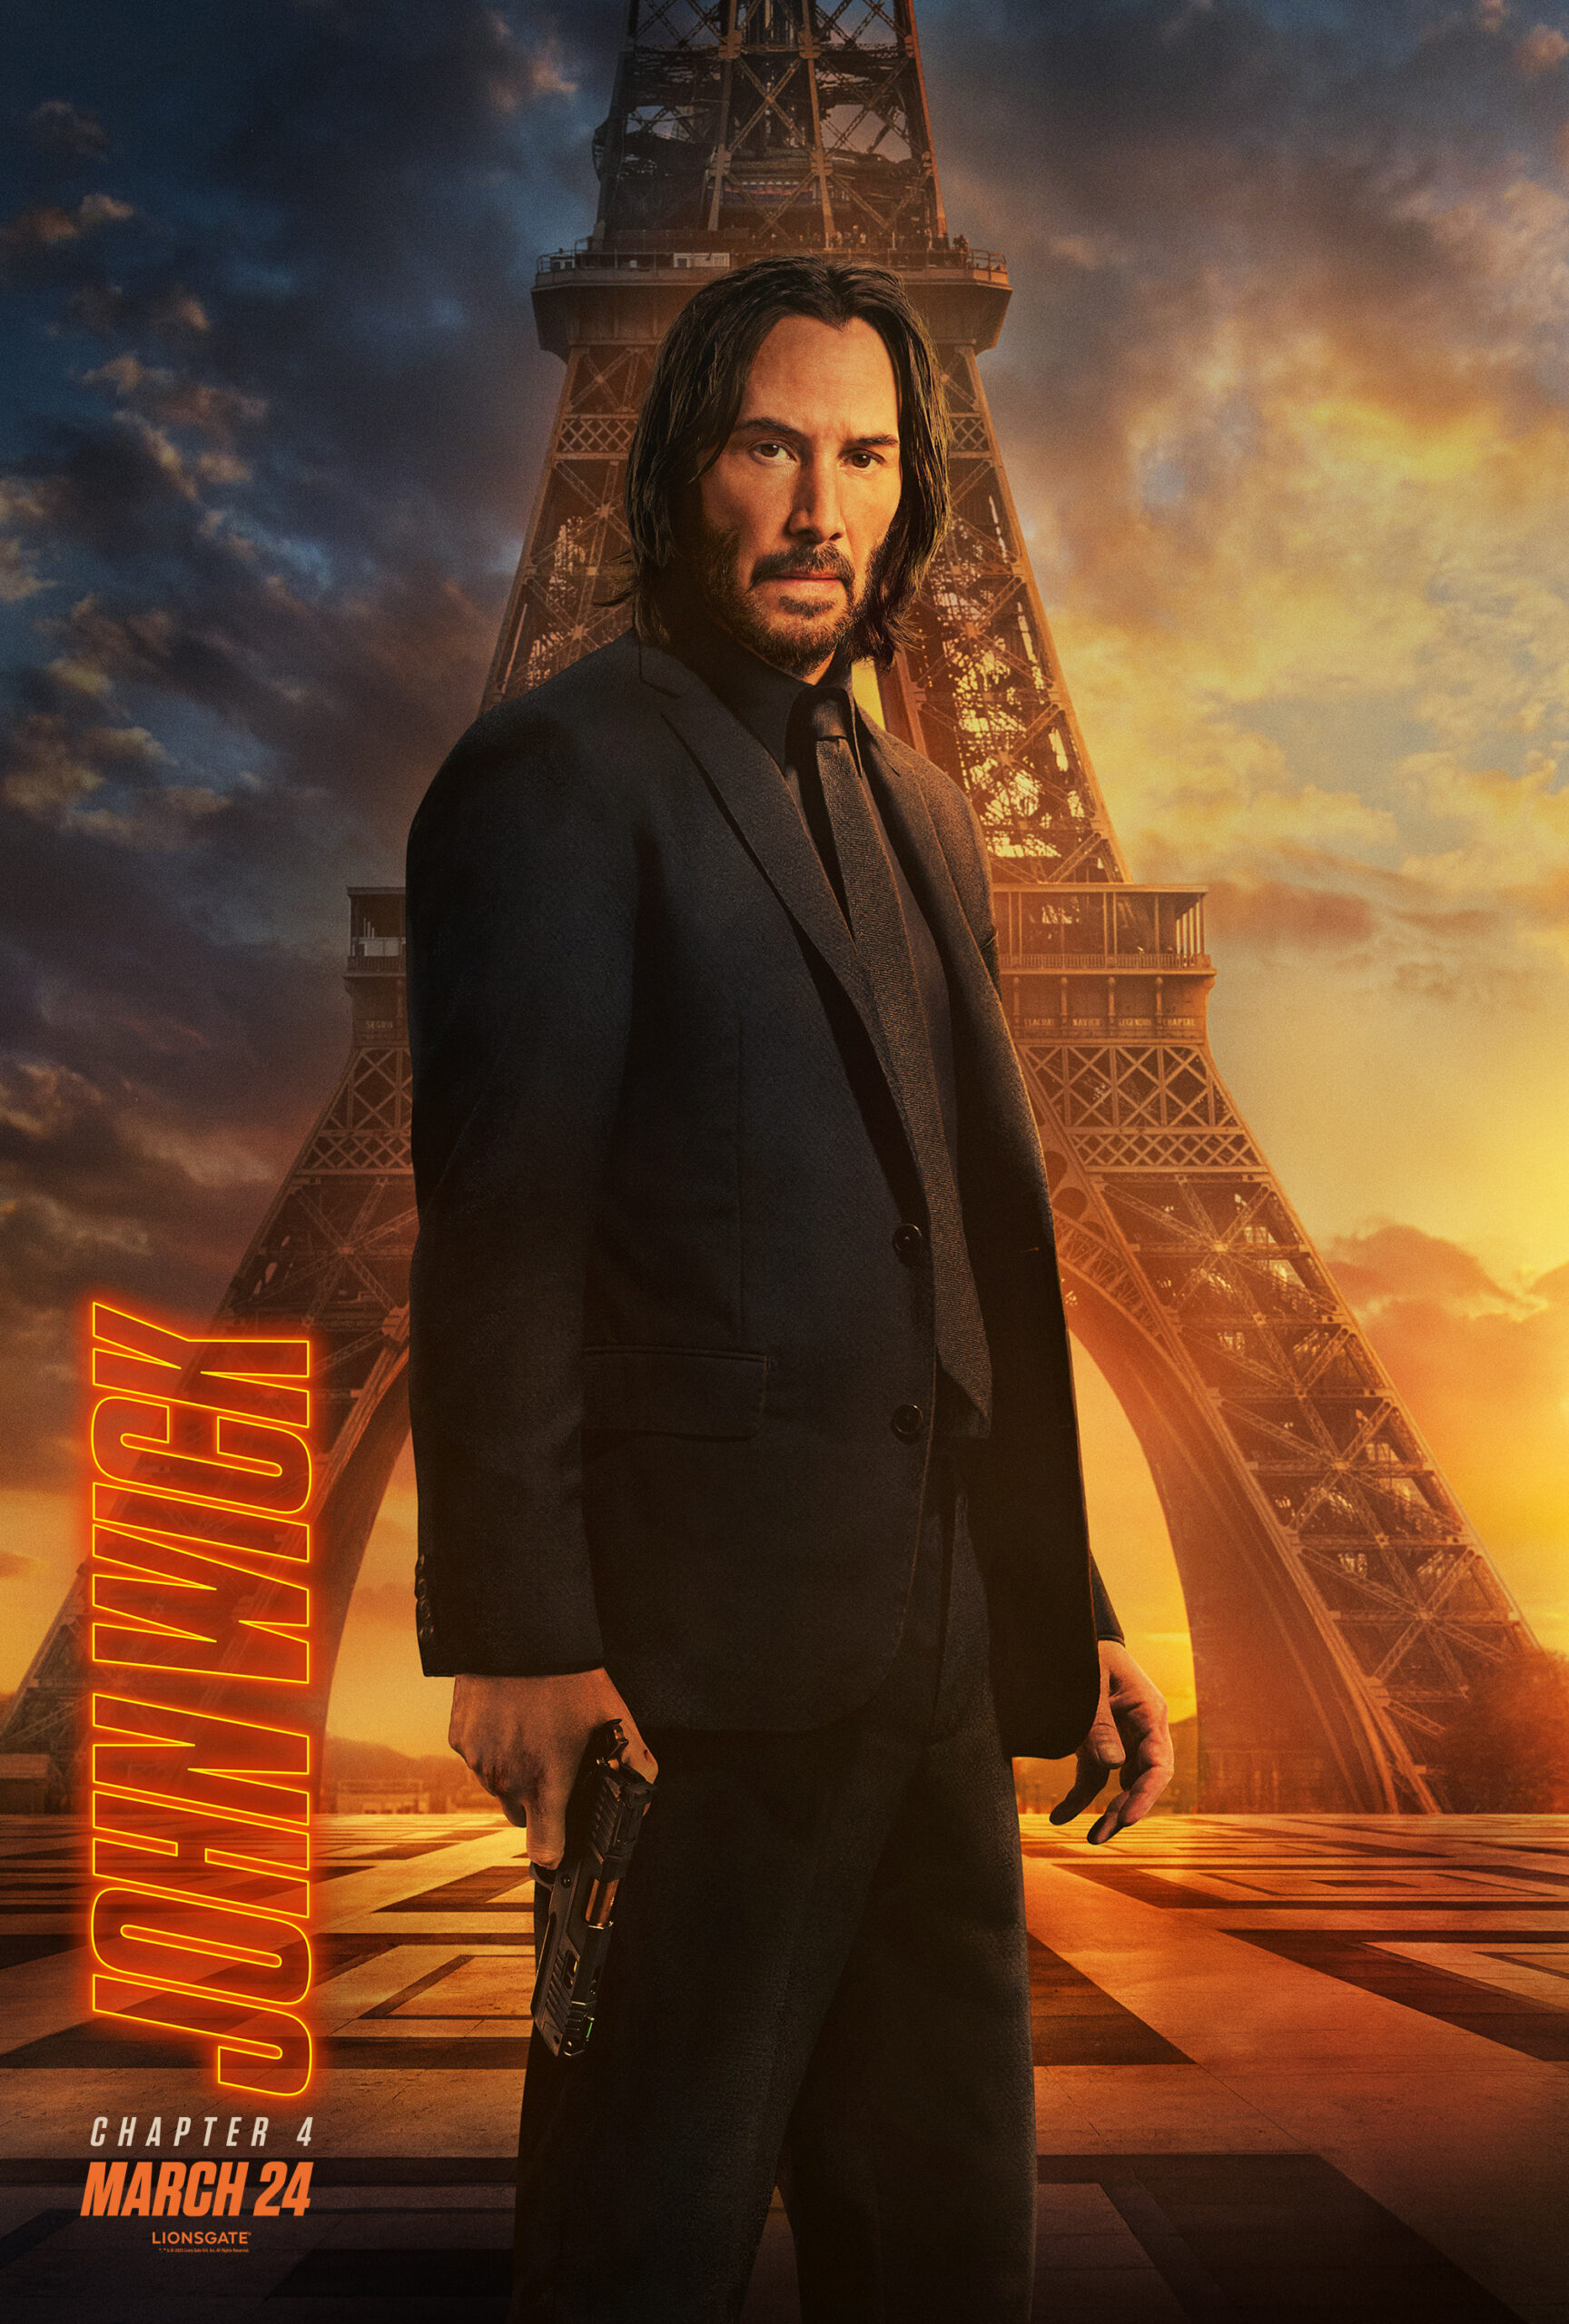 ‘John Wick: Chapter 4’ Reveals 11 New Character Posters Featuring Keanu Reeves, Donnie Yen, Bill Skarsgard, & More